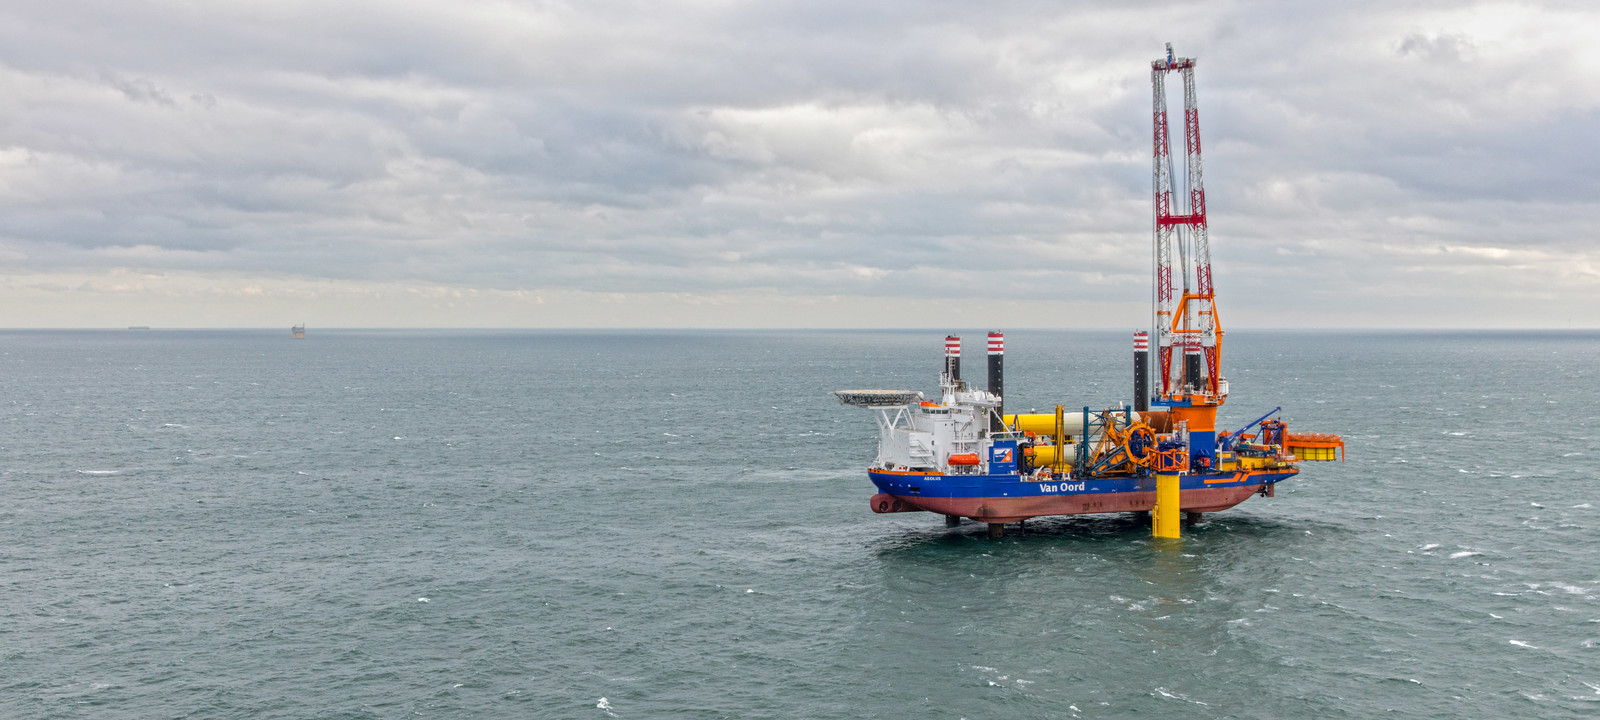 Van Oord’s offshore installation vessel Aeolus successfully completed the installation of 77 foundations for the Borssele III & IV wind farm